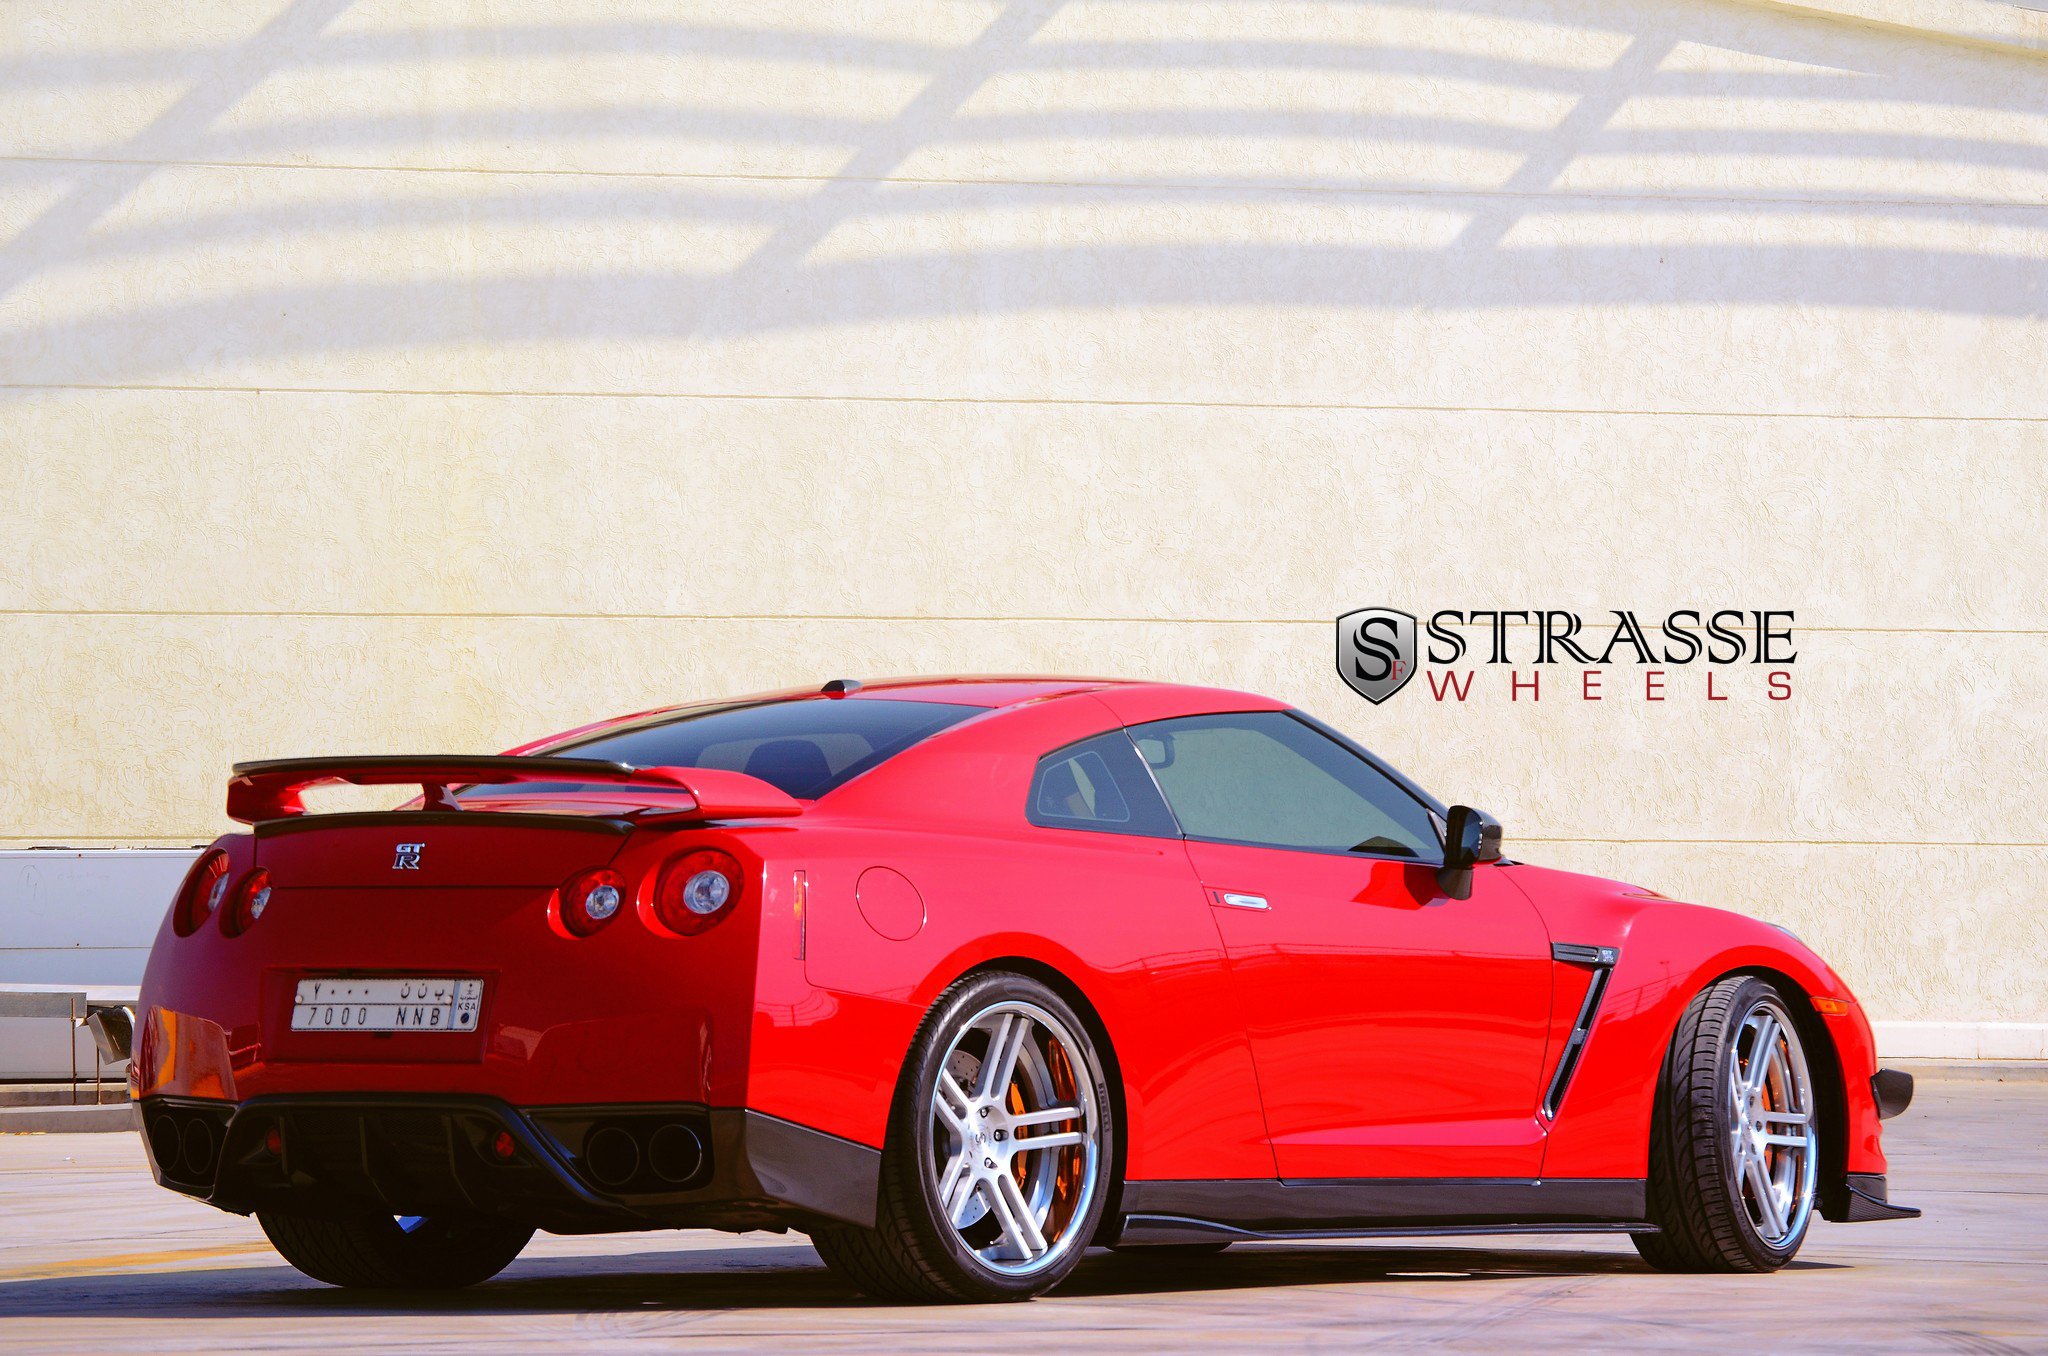 strasse, Wheels, Gt r, Nissan, Cars, Coupe Wallpaper